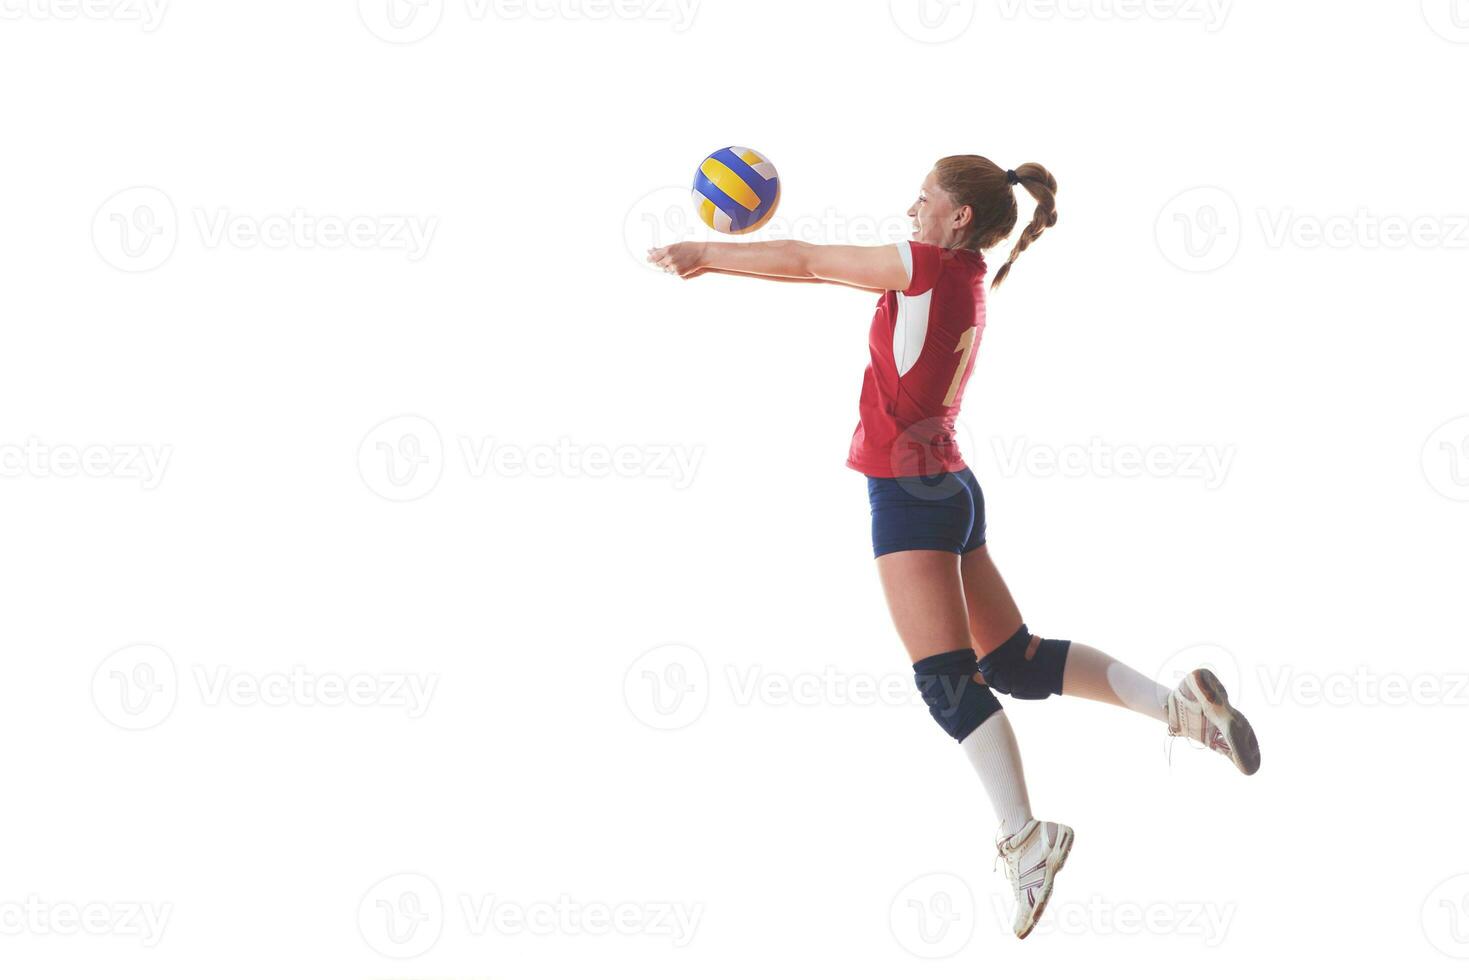 femme jouant au volley-ball photo